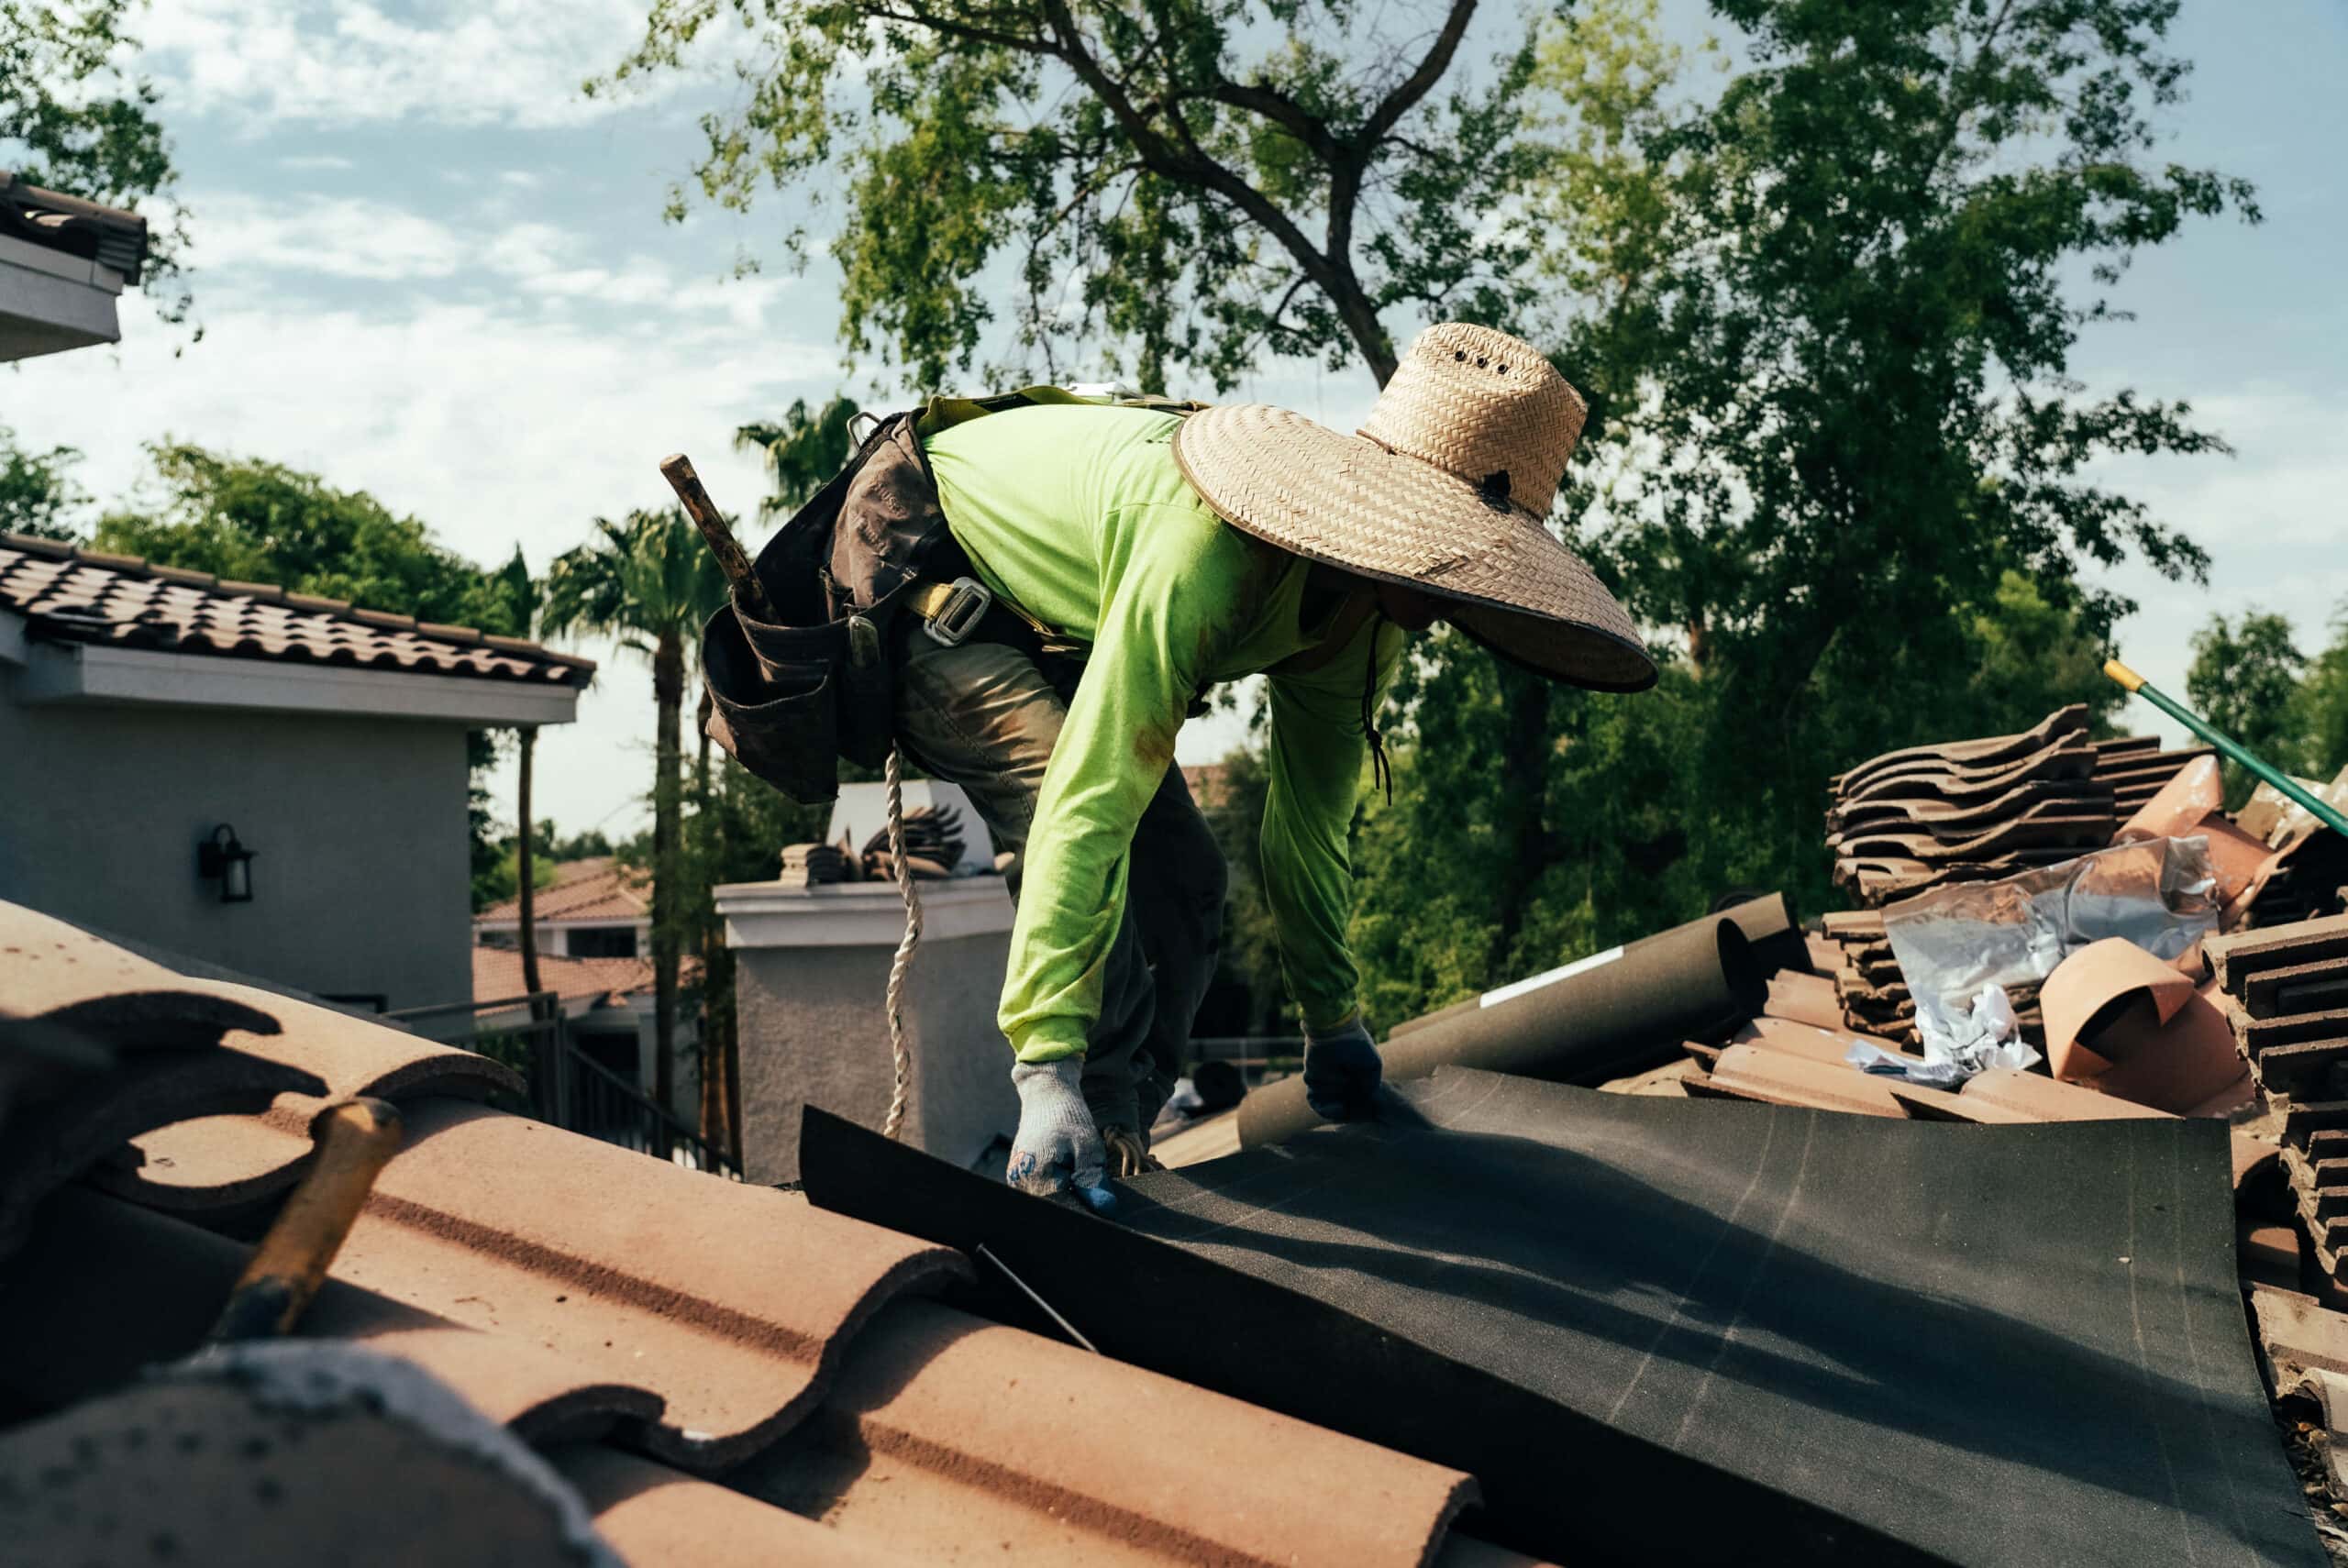 Expert resealing tile roof edges as part of a re-felt service in Paradise Valley.